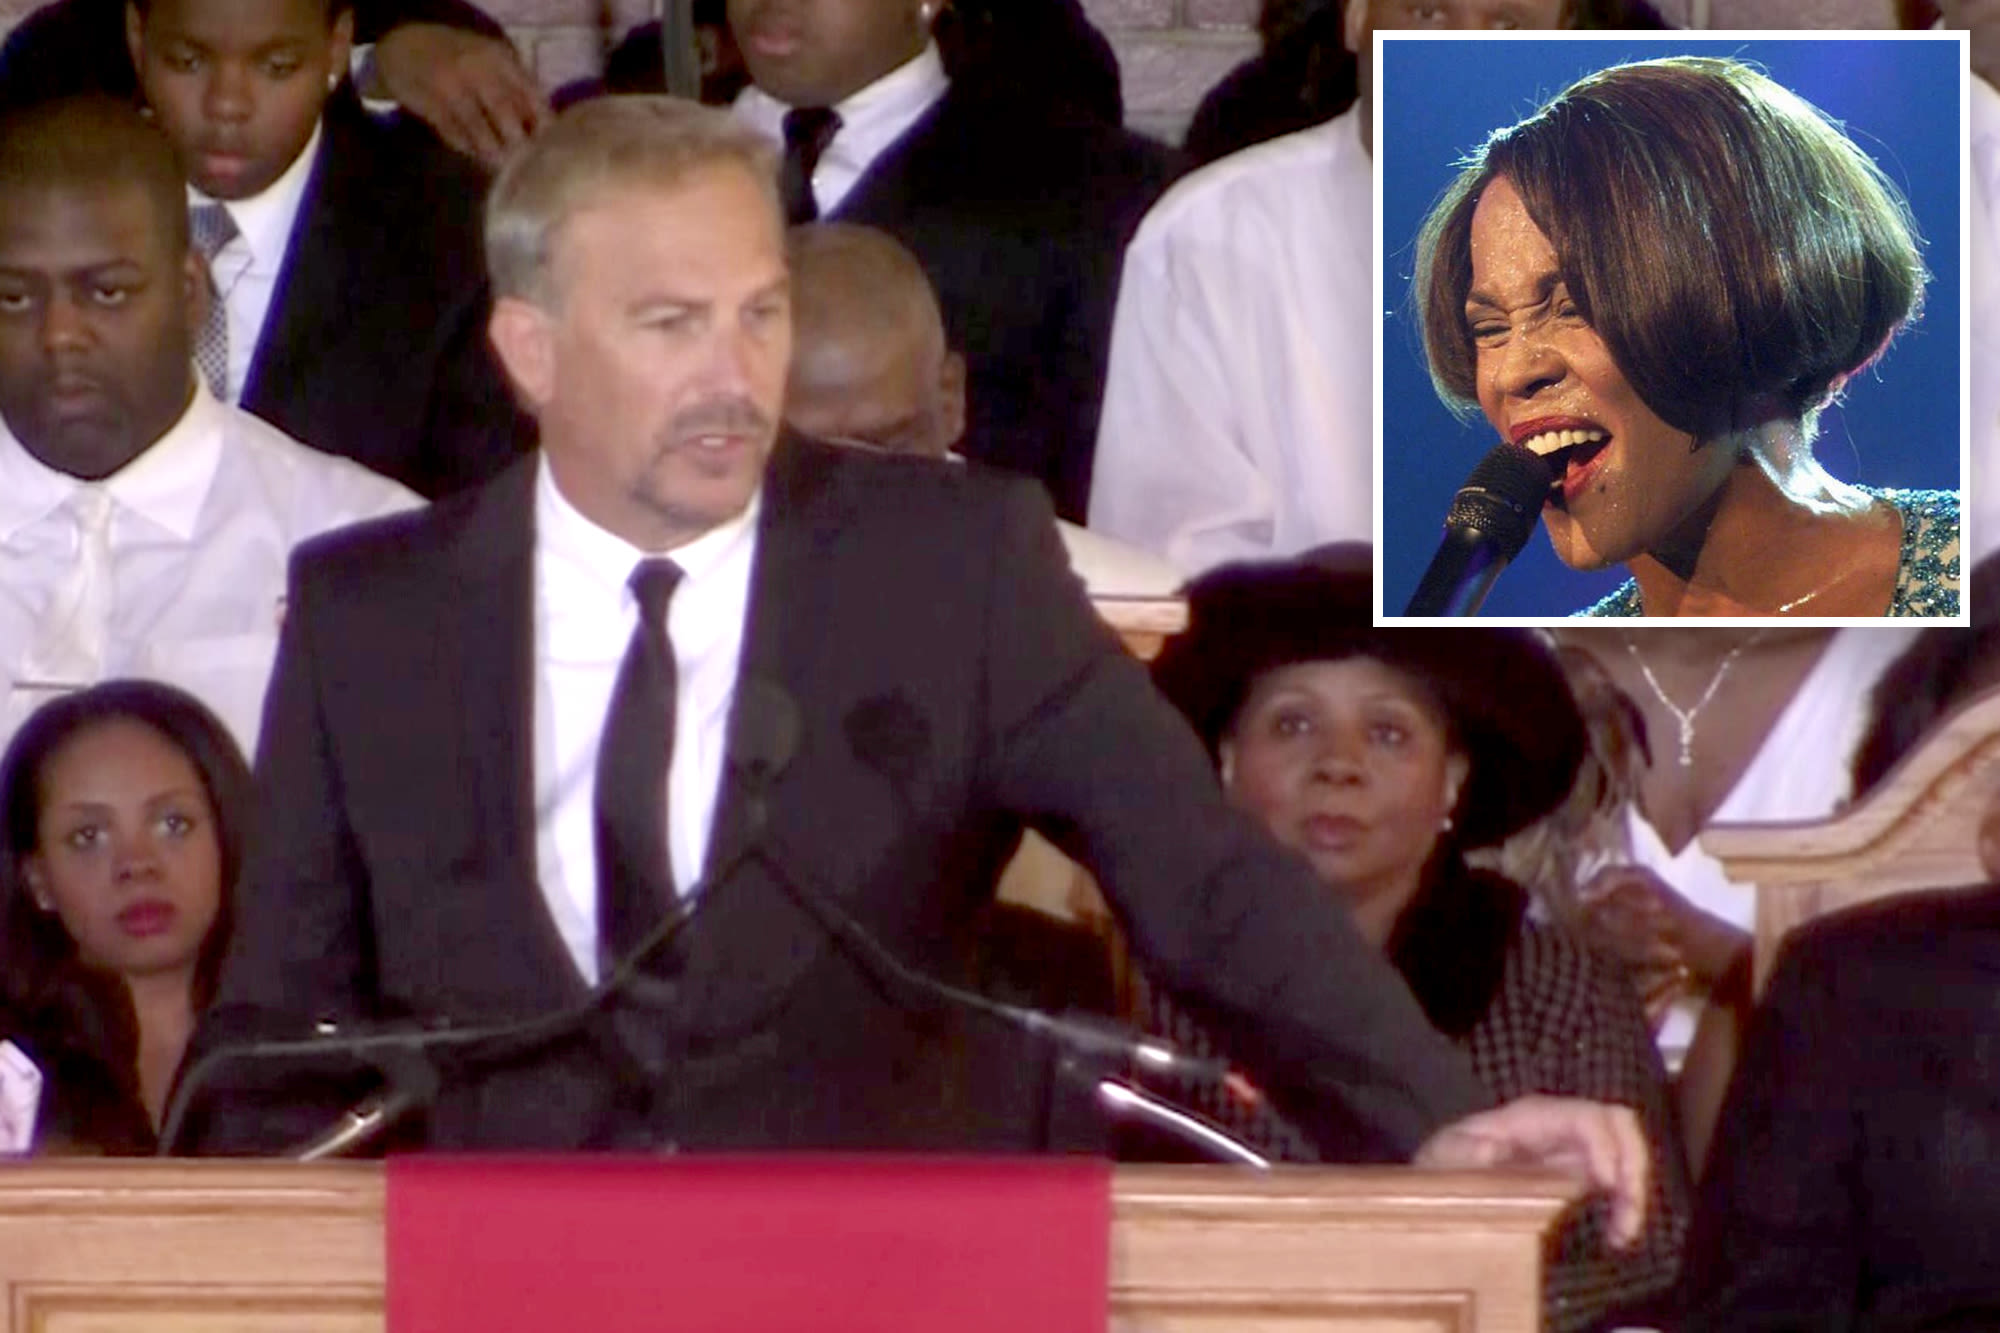 Kevin Costner refused to shorten his 17-minute eulogy at Whitney Houston’s funeral: ‘They can get over that’